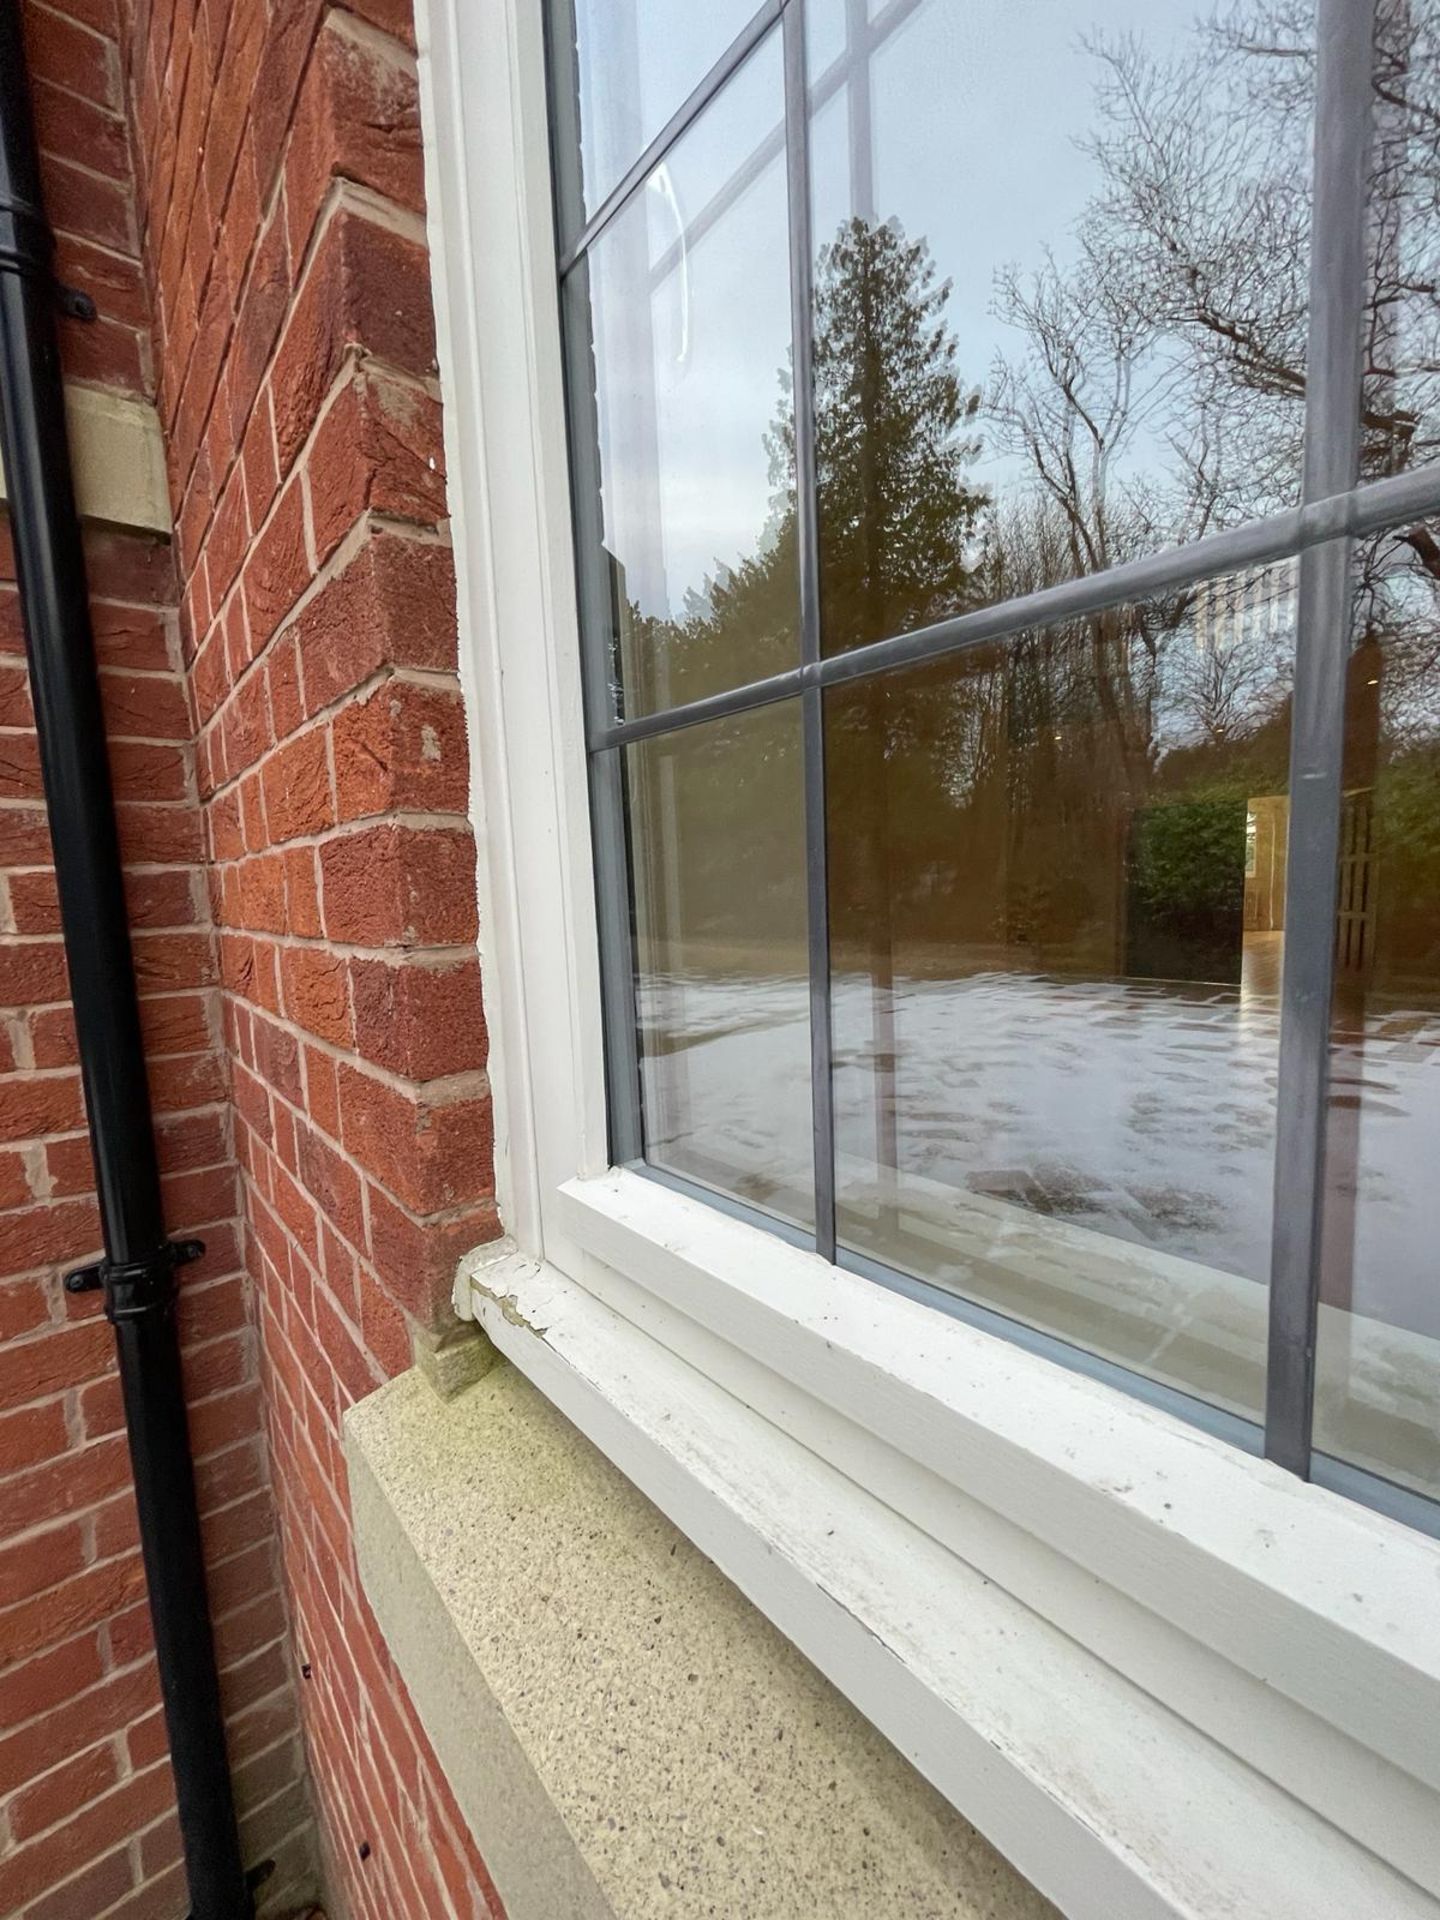 1 x Hardwood Timber Double Glazed & Leaded Window Frame - Ref: PAN147 / M-HALL - CL896 - NO VAT - Image 18 of 18